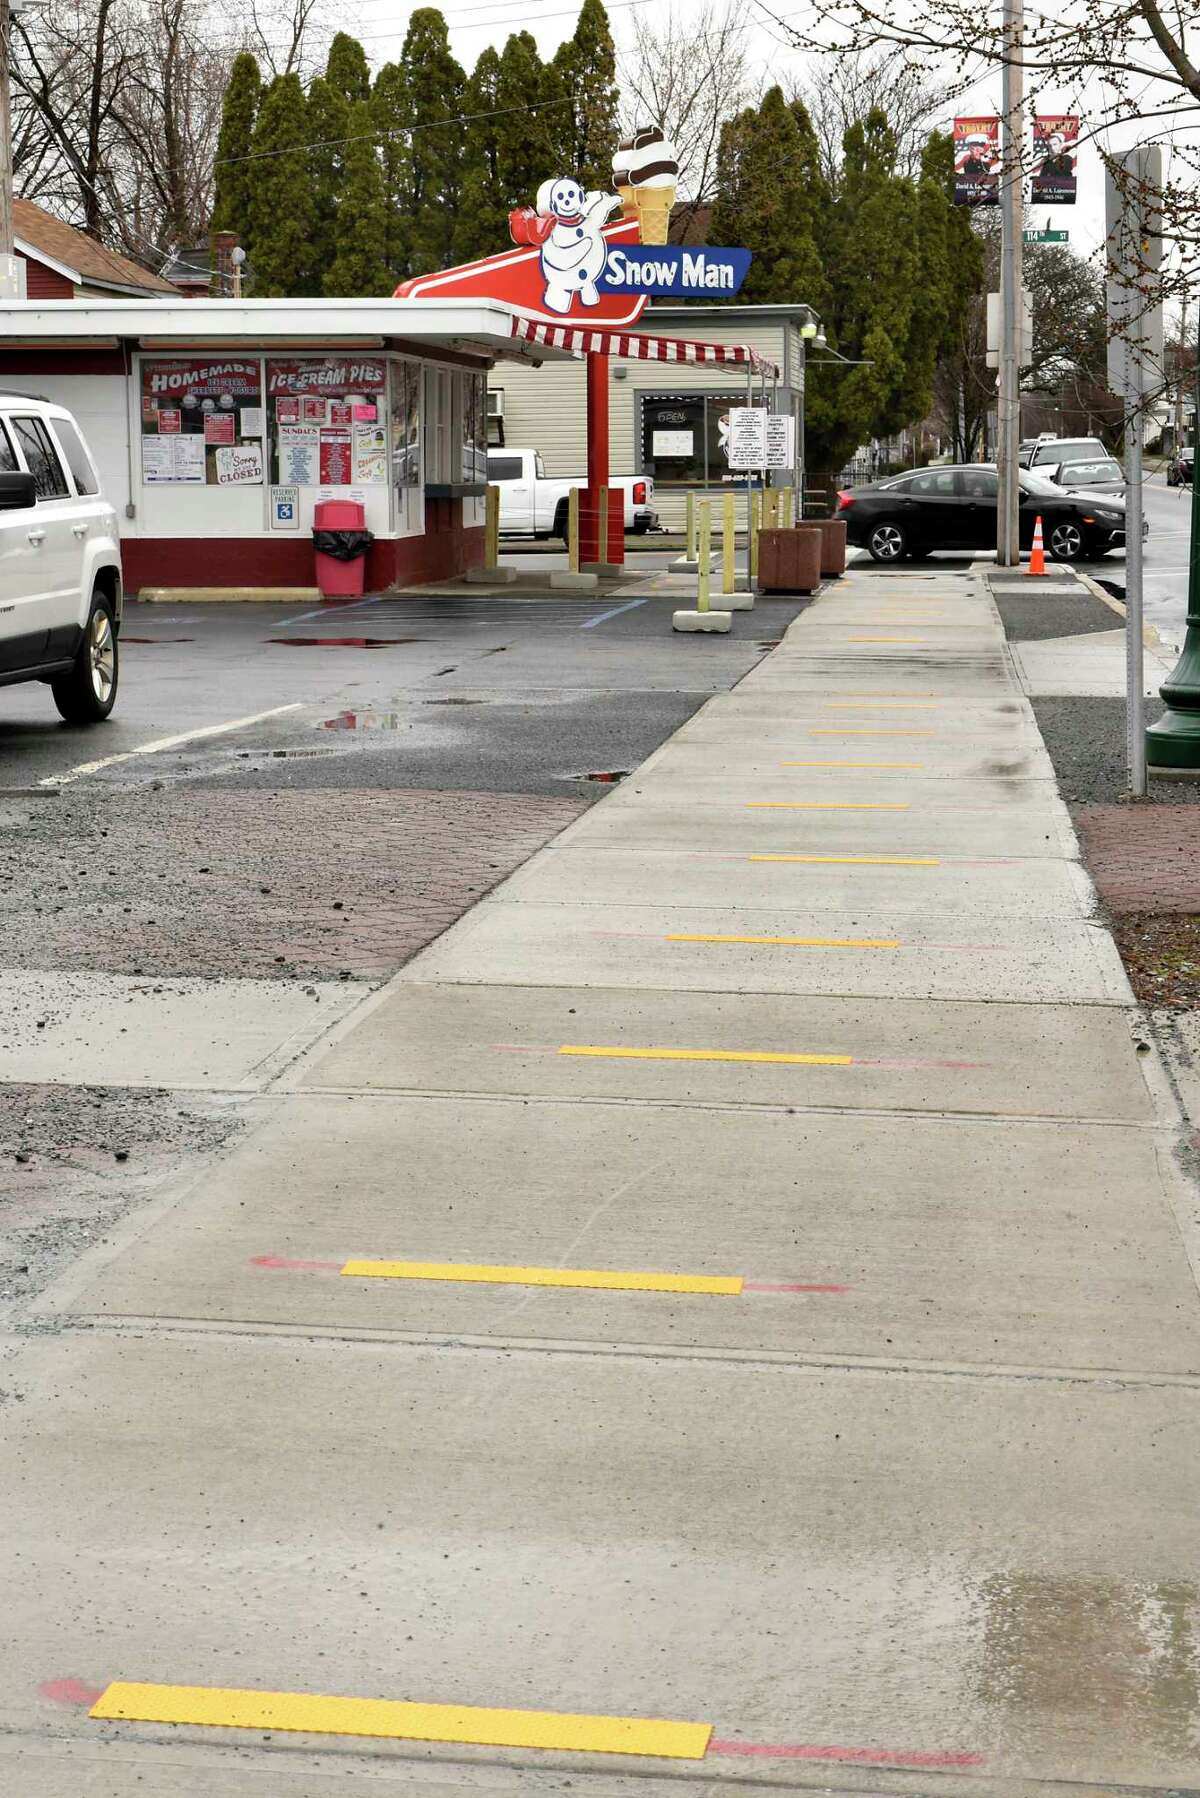 Social distancing marks are seen on the sidewalk in front of Snowman ice cream stand on Friday, April 3, 2020 in Troy, N.Y. Owner John Murphy carefully set up everything to deal with social distancing but was forced to close when people ignored the safeguards. He's allowing pre-ordered pickup and trying to figure out how to reopen. (Lori Van Buren/Times Union)